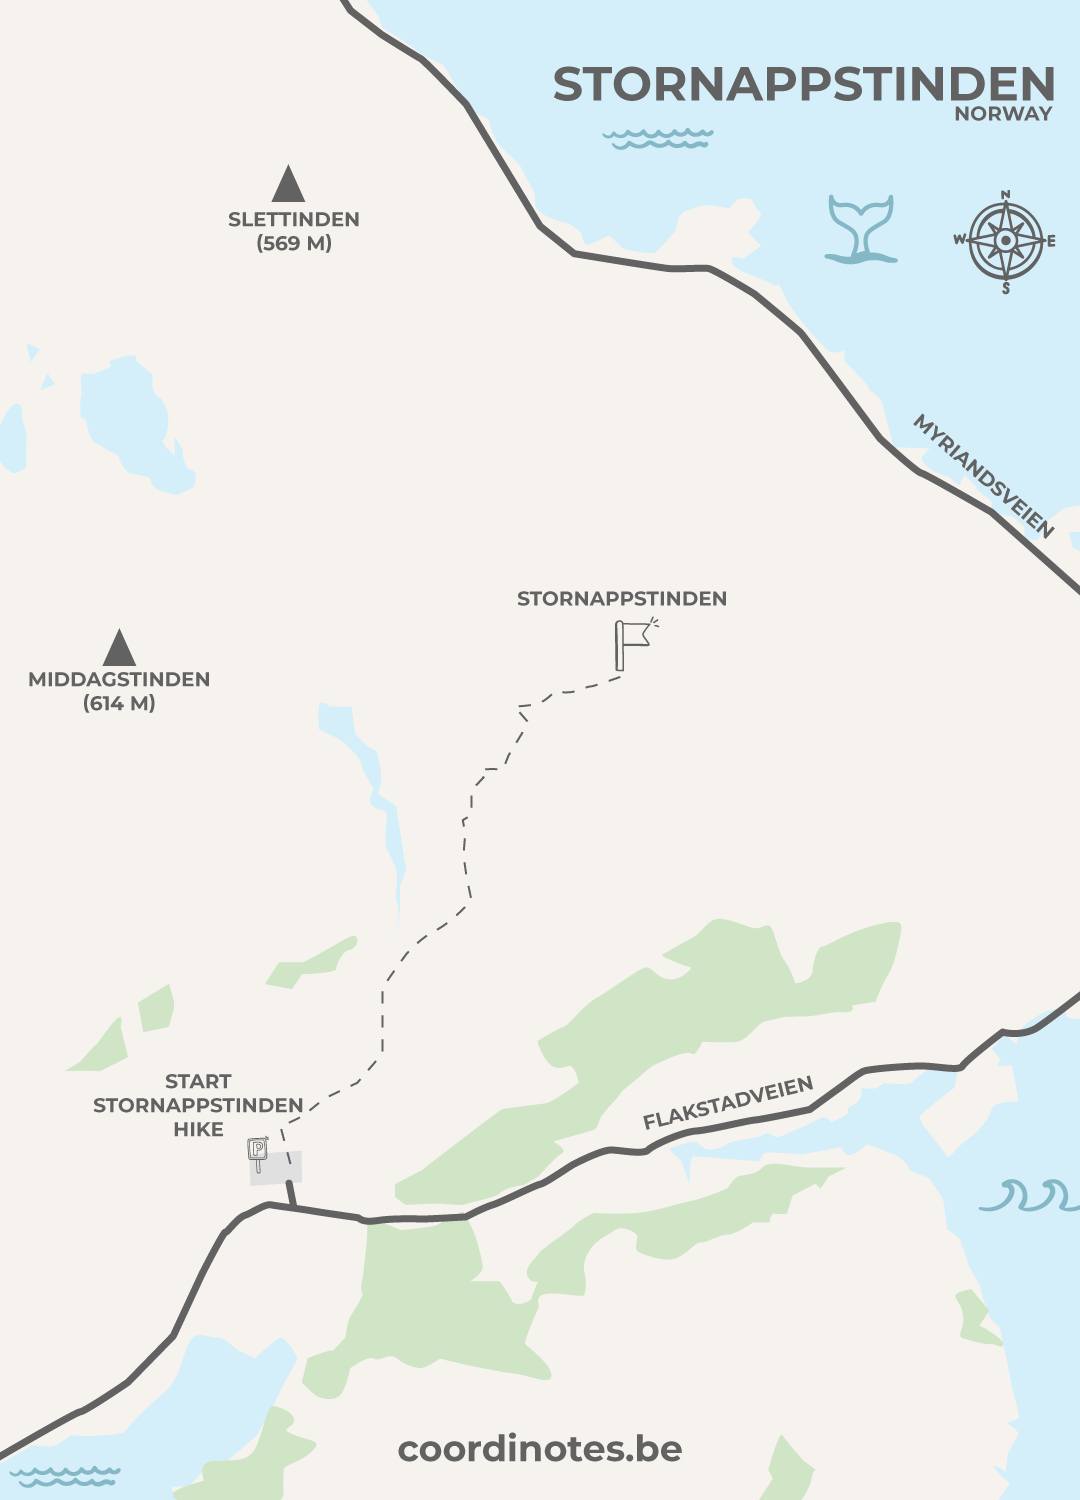 Map for the Stornappstinden hike